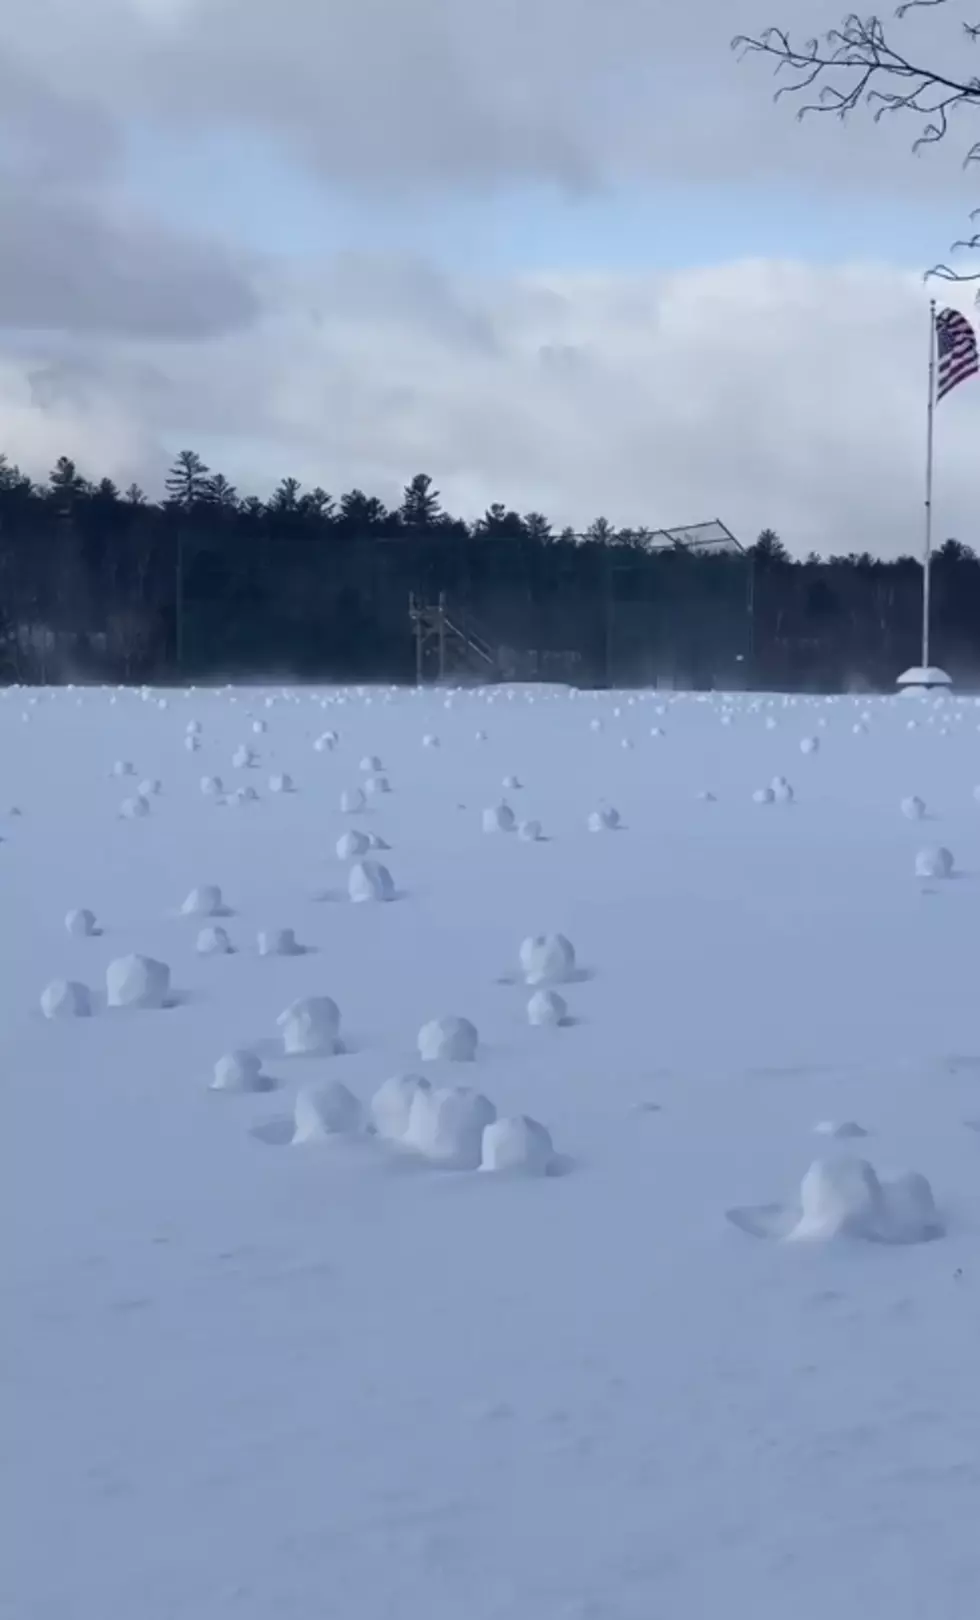 This Is Bizarre&#8230;Check Out These Wind-Made Snowballs [VIDEO]